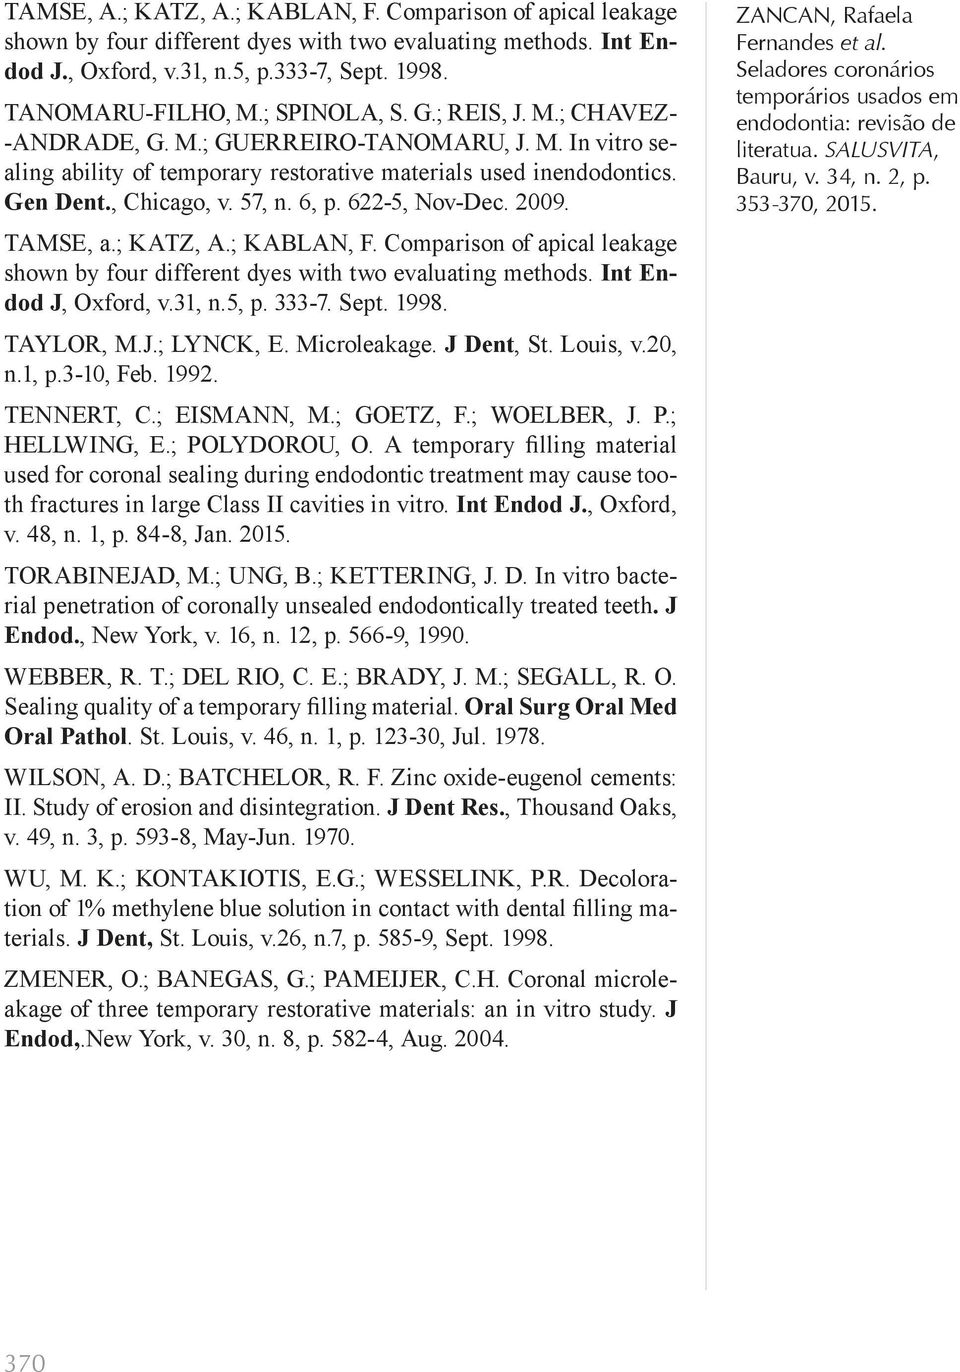 622-5, Nov-Dec. 2009. TAMSE, a.; KATZ, A.; KABLAN, F. Comparison of apical leakage shown by four different dyes with two evaluating methods. Int Endod J, Oxford, v.31, n.5, p. 333-7. Sept. 1998.